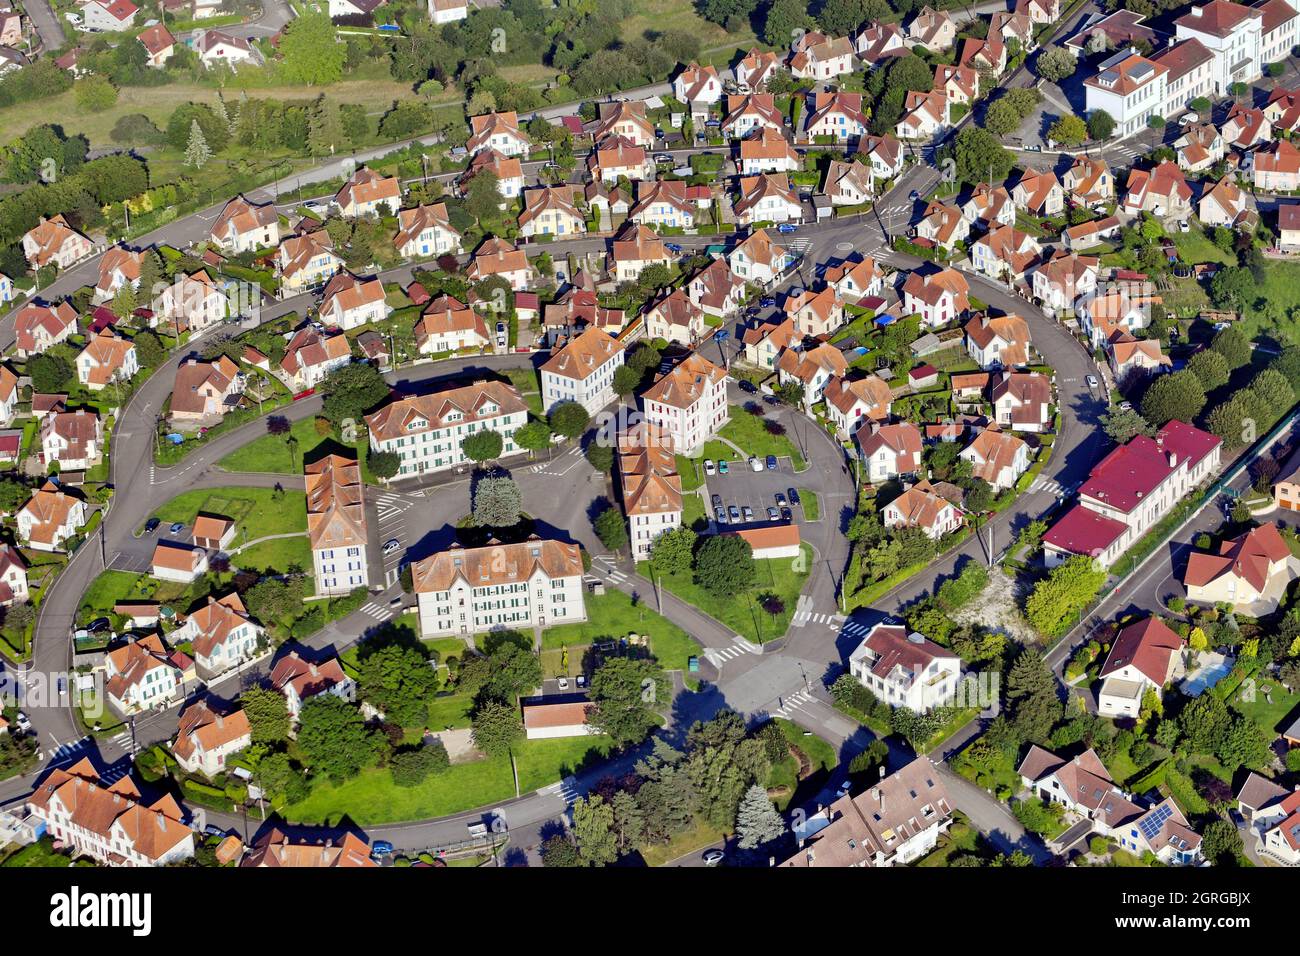 France, Doubs, Montbéliard, Chiffogne district, town planning, aerial view Stock Photo